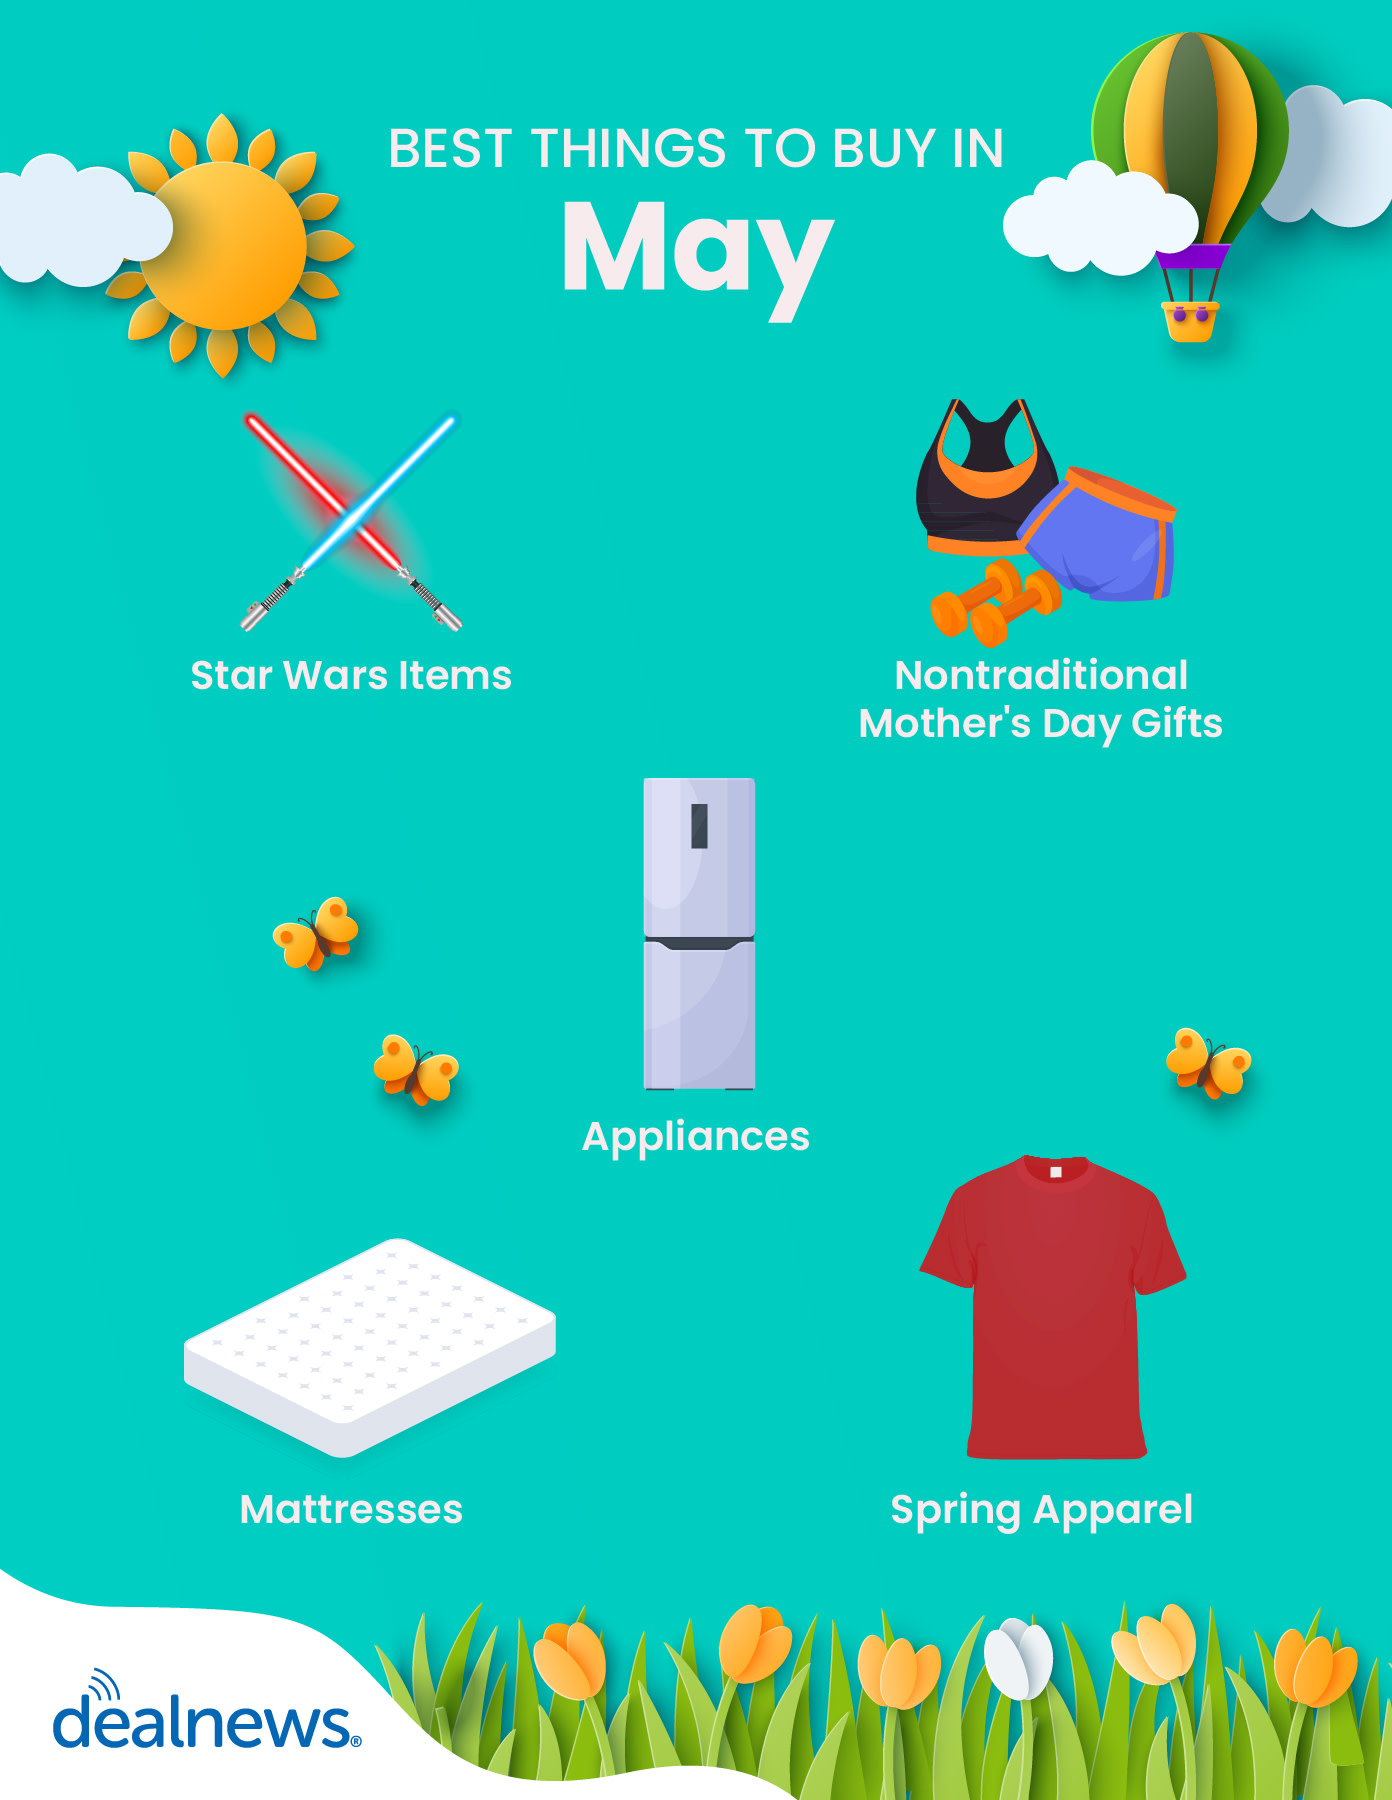 Best things to buy in May depicted in an infographic.